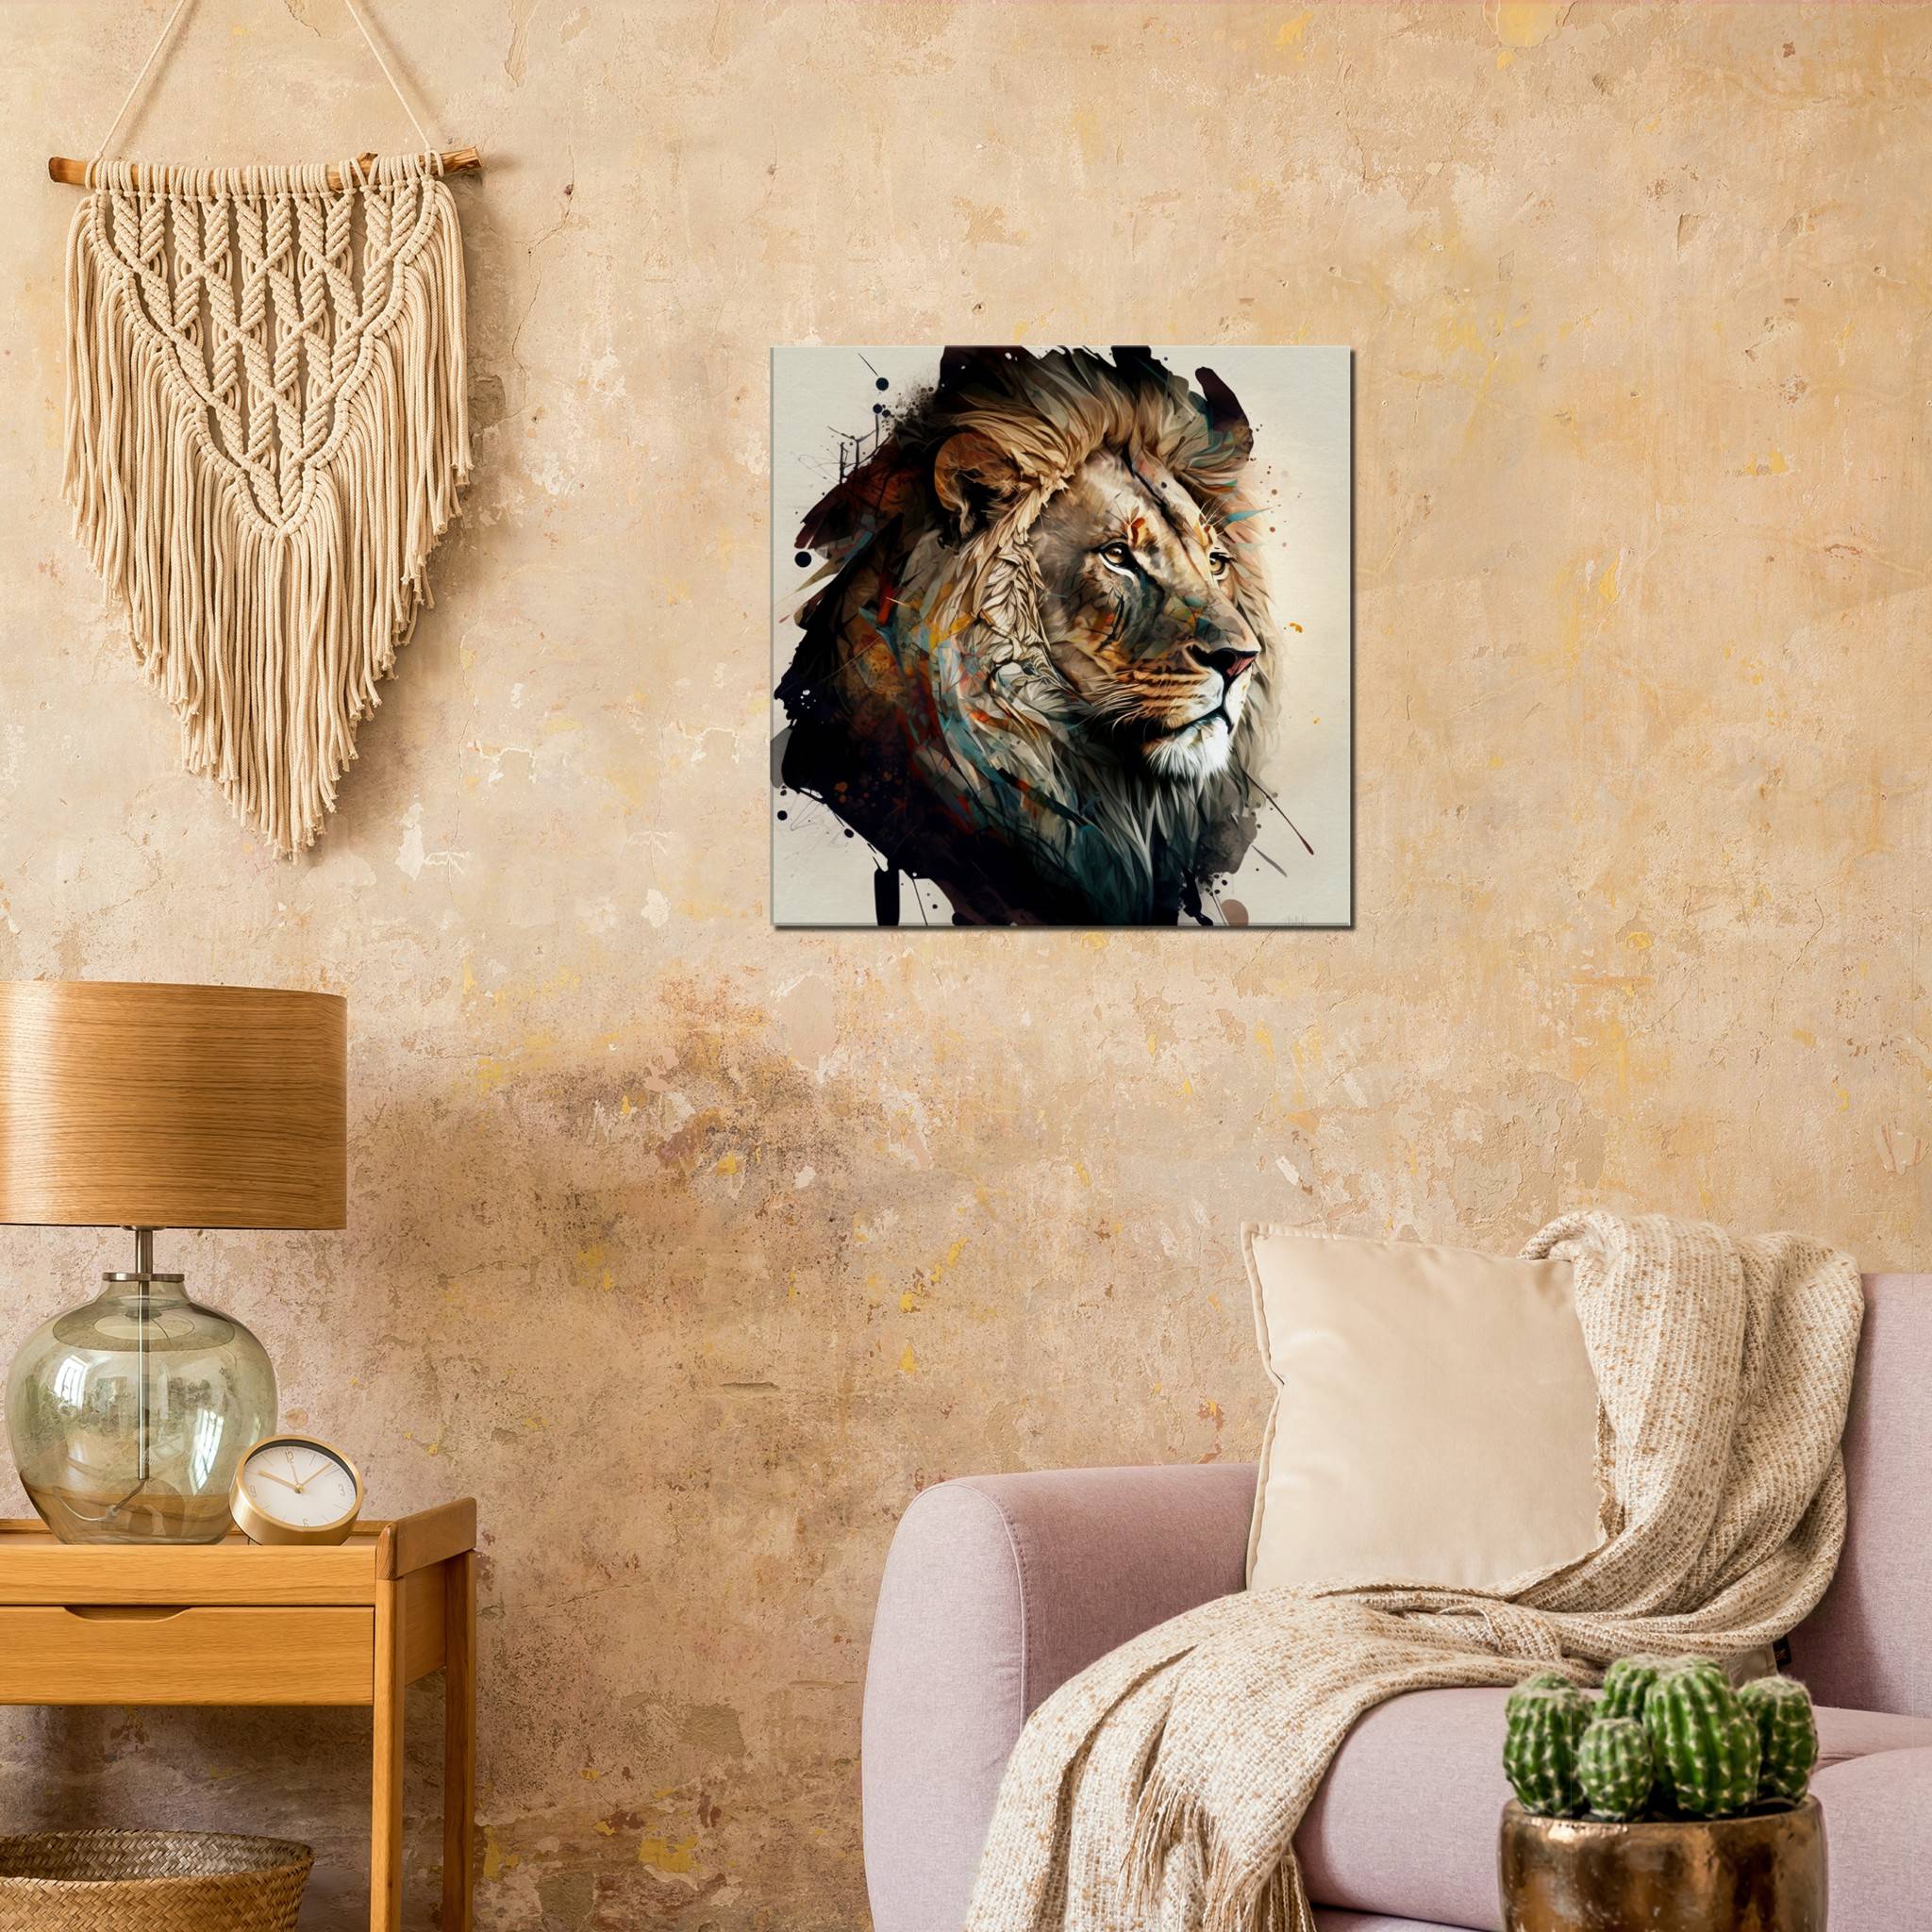 Lion Close to Reality 2 / 60 x 60 cm (Canvas Print) Canvas Print Canvas reproduction The Pianist Print On Demand Fabled Gallery https://fabledgallery.art/product/lion-close-to-reality-2-60-x-60-cm-canvas-print/